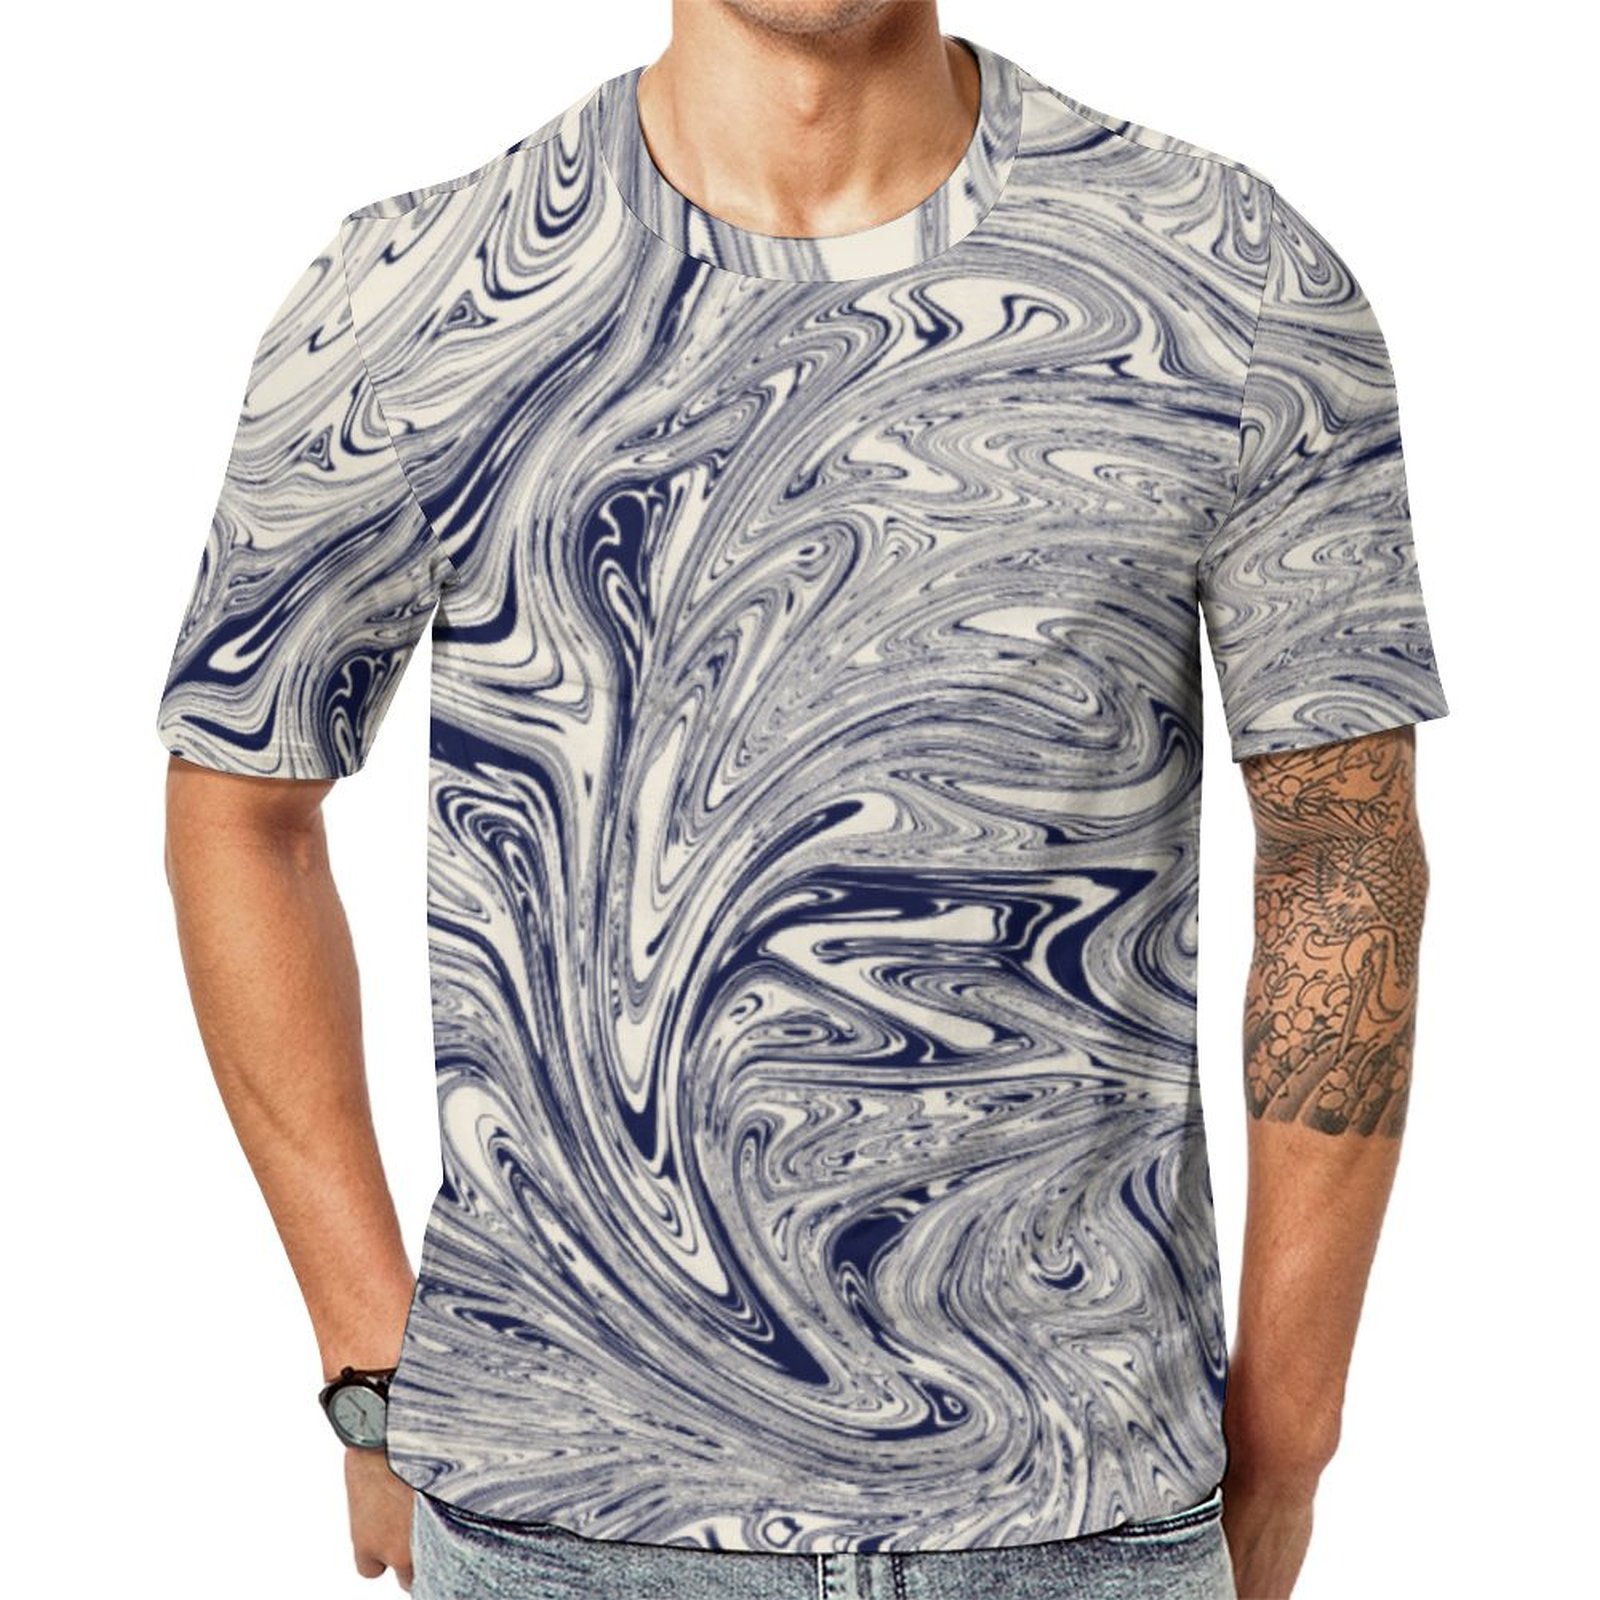 Elegant Blue And White Marble Swirl Short Sleeve Print Unisex Tshirt Summer Casual Tees for Men and Women Coolcoshirts